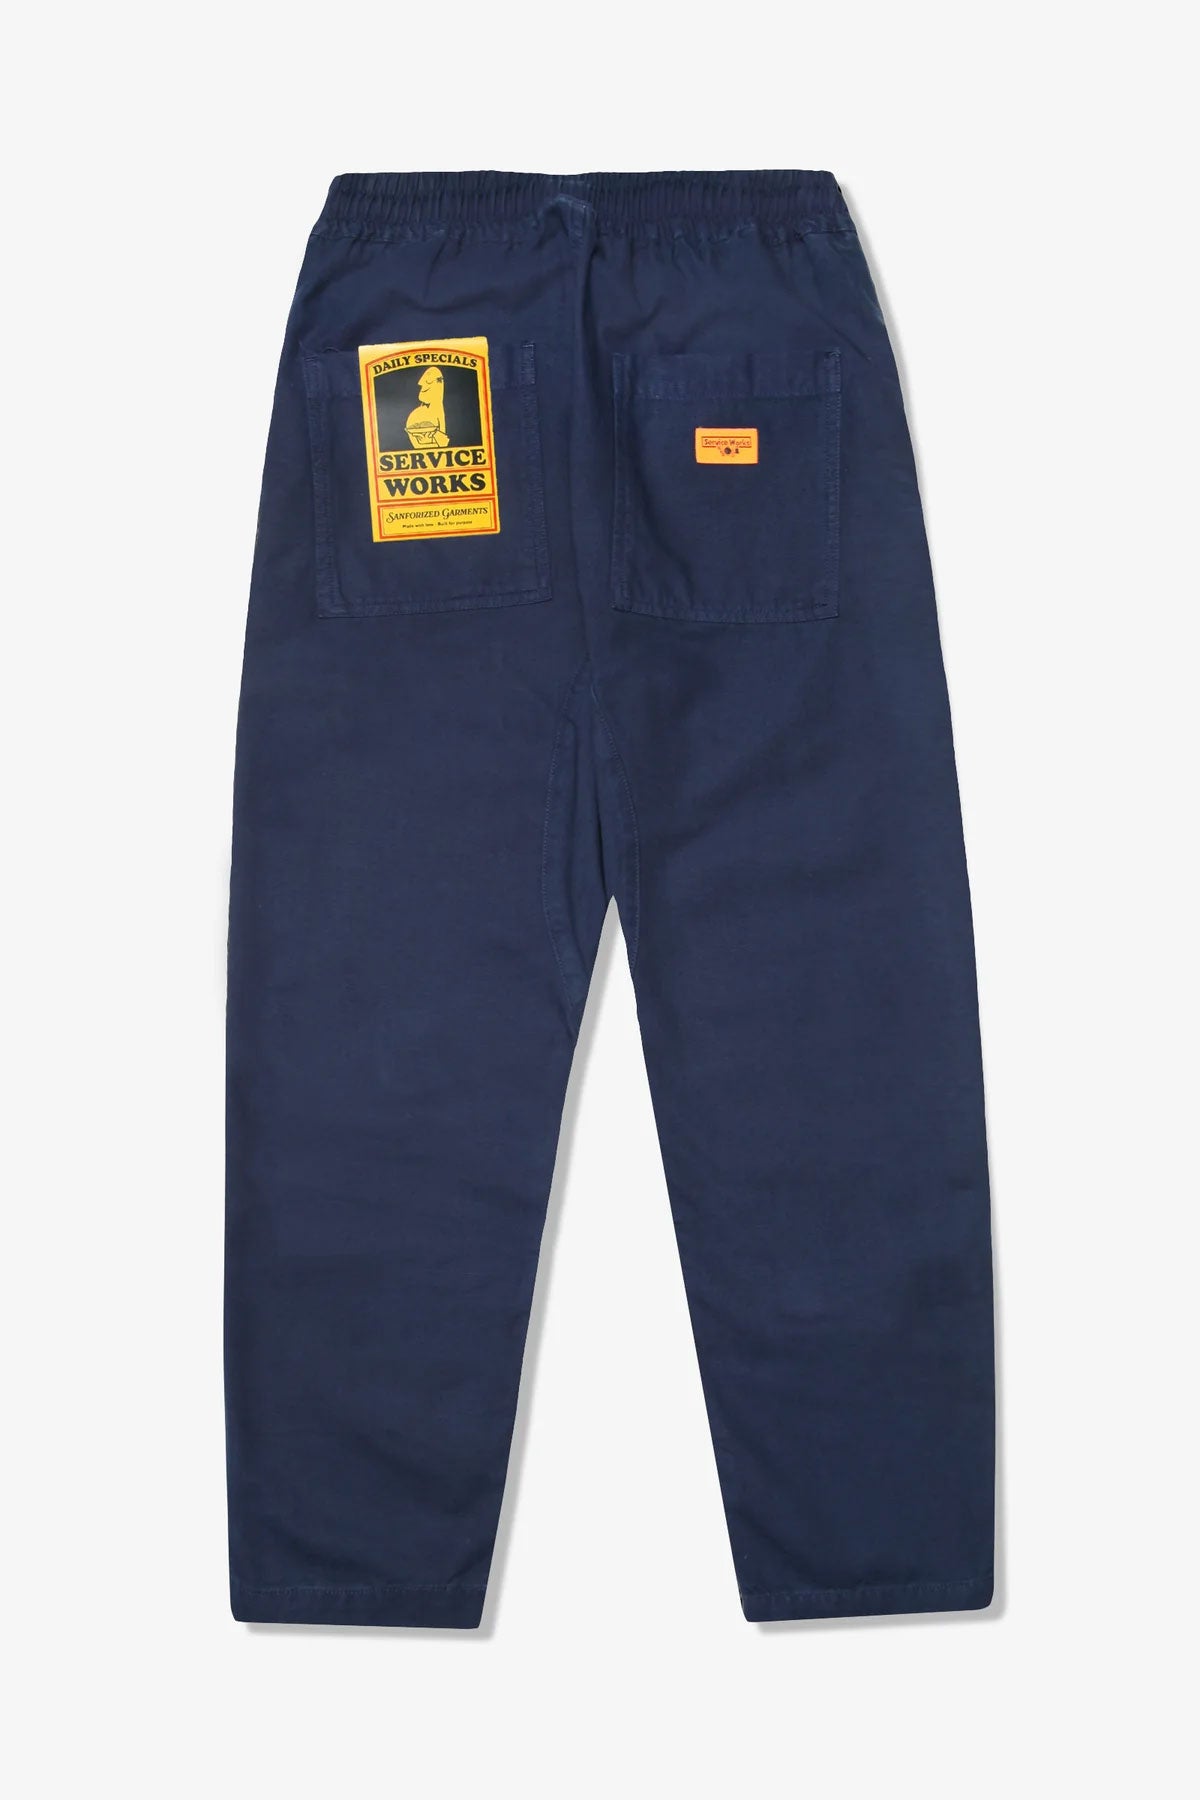 Service Works - Classic Canvas Chef Pants in Navy